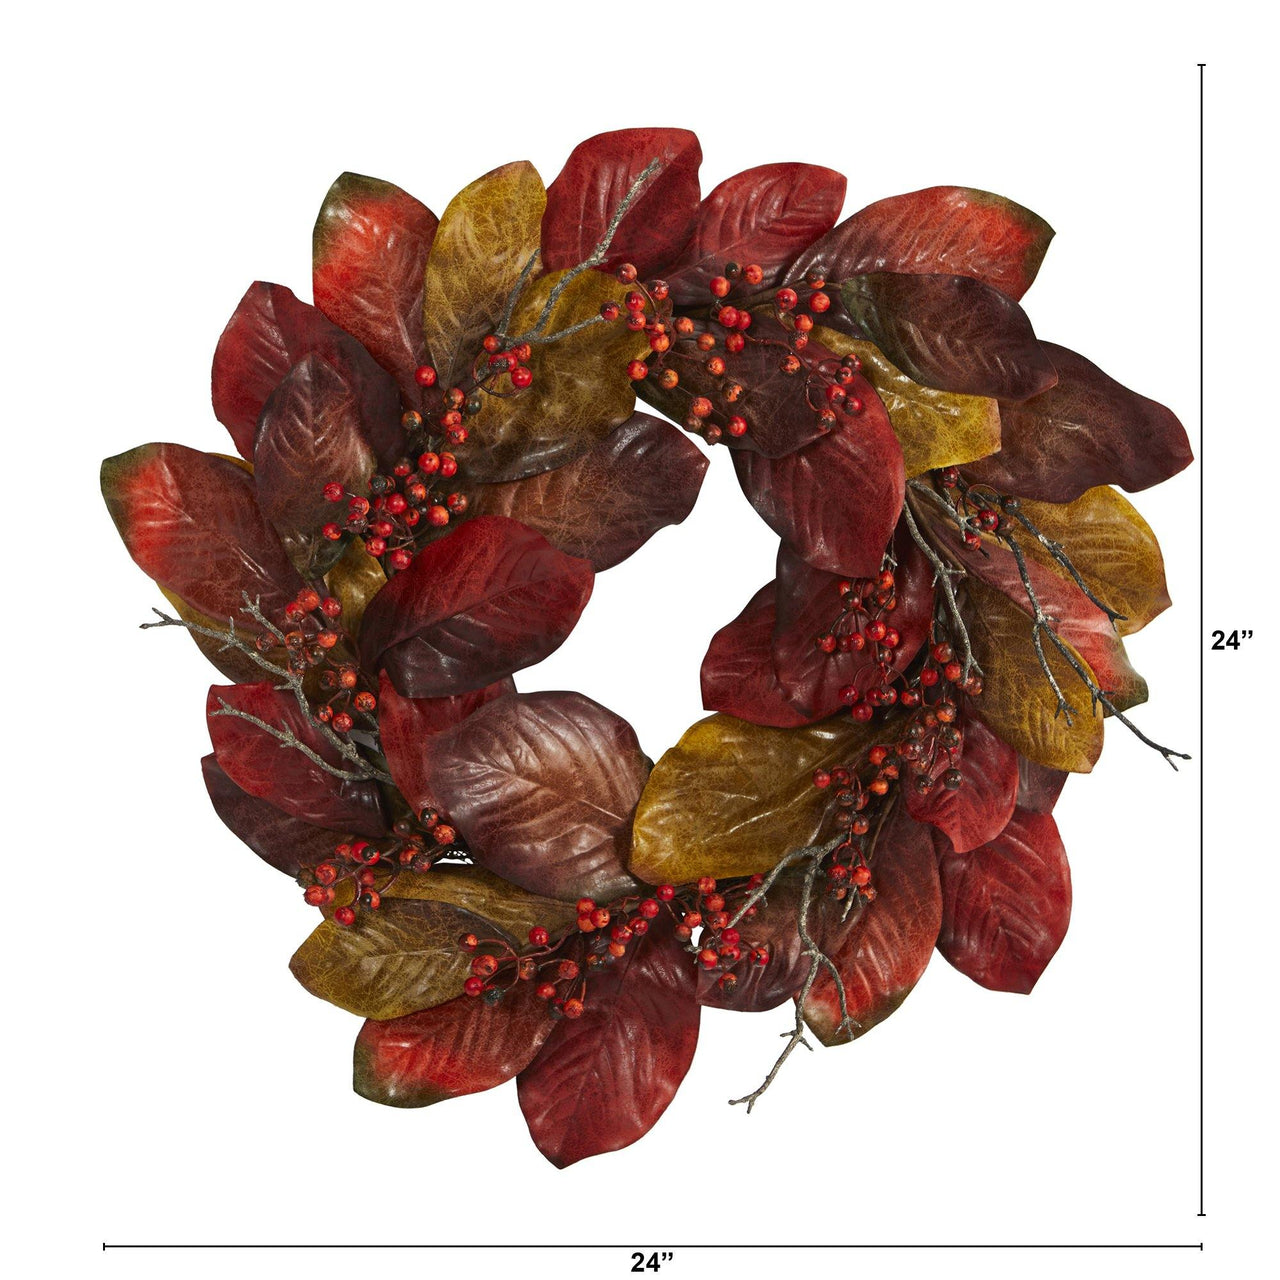 24” Harvest Magnolia Leaf and Berries Artificial Wreath - The Fox Decor